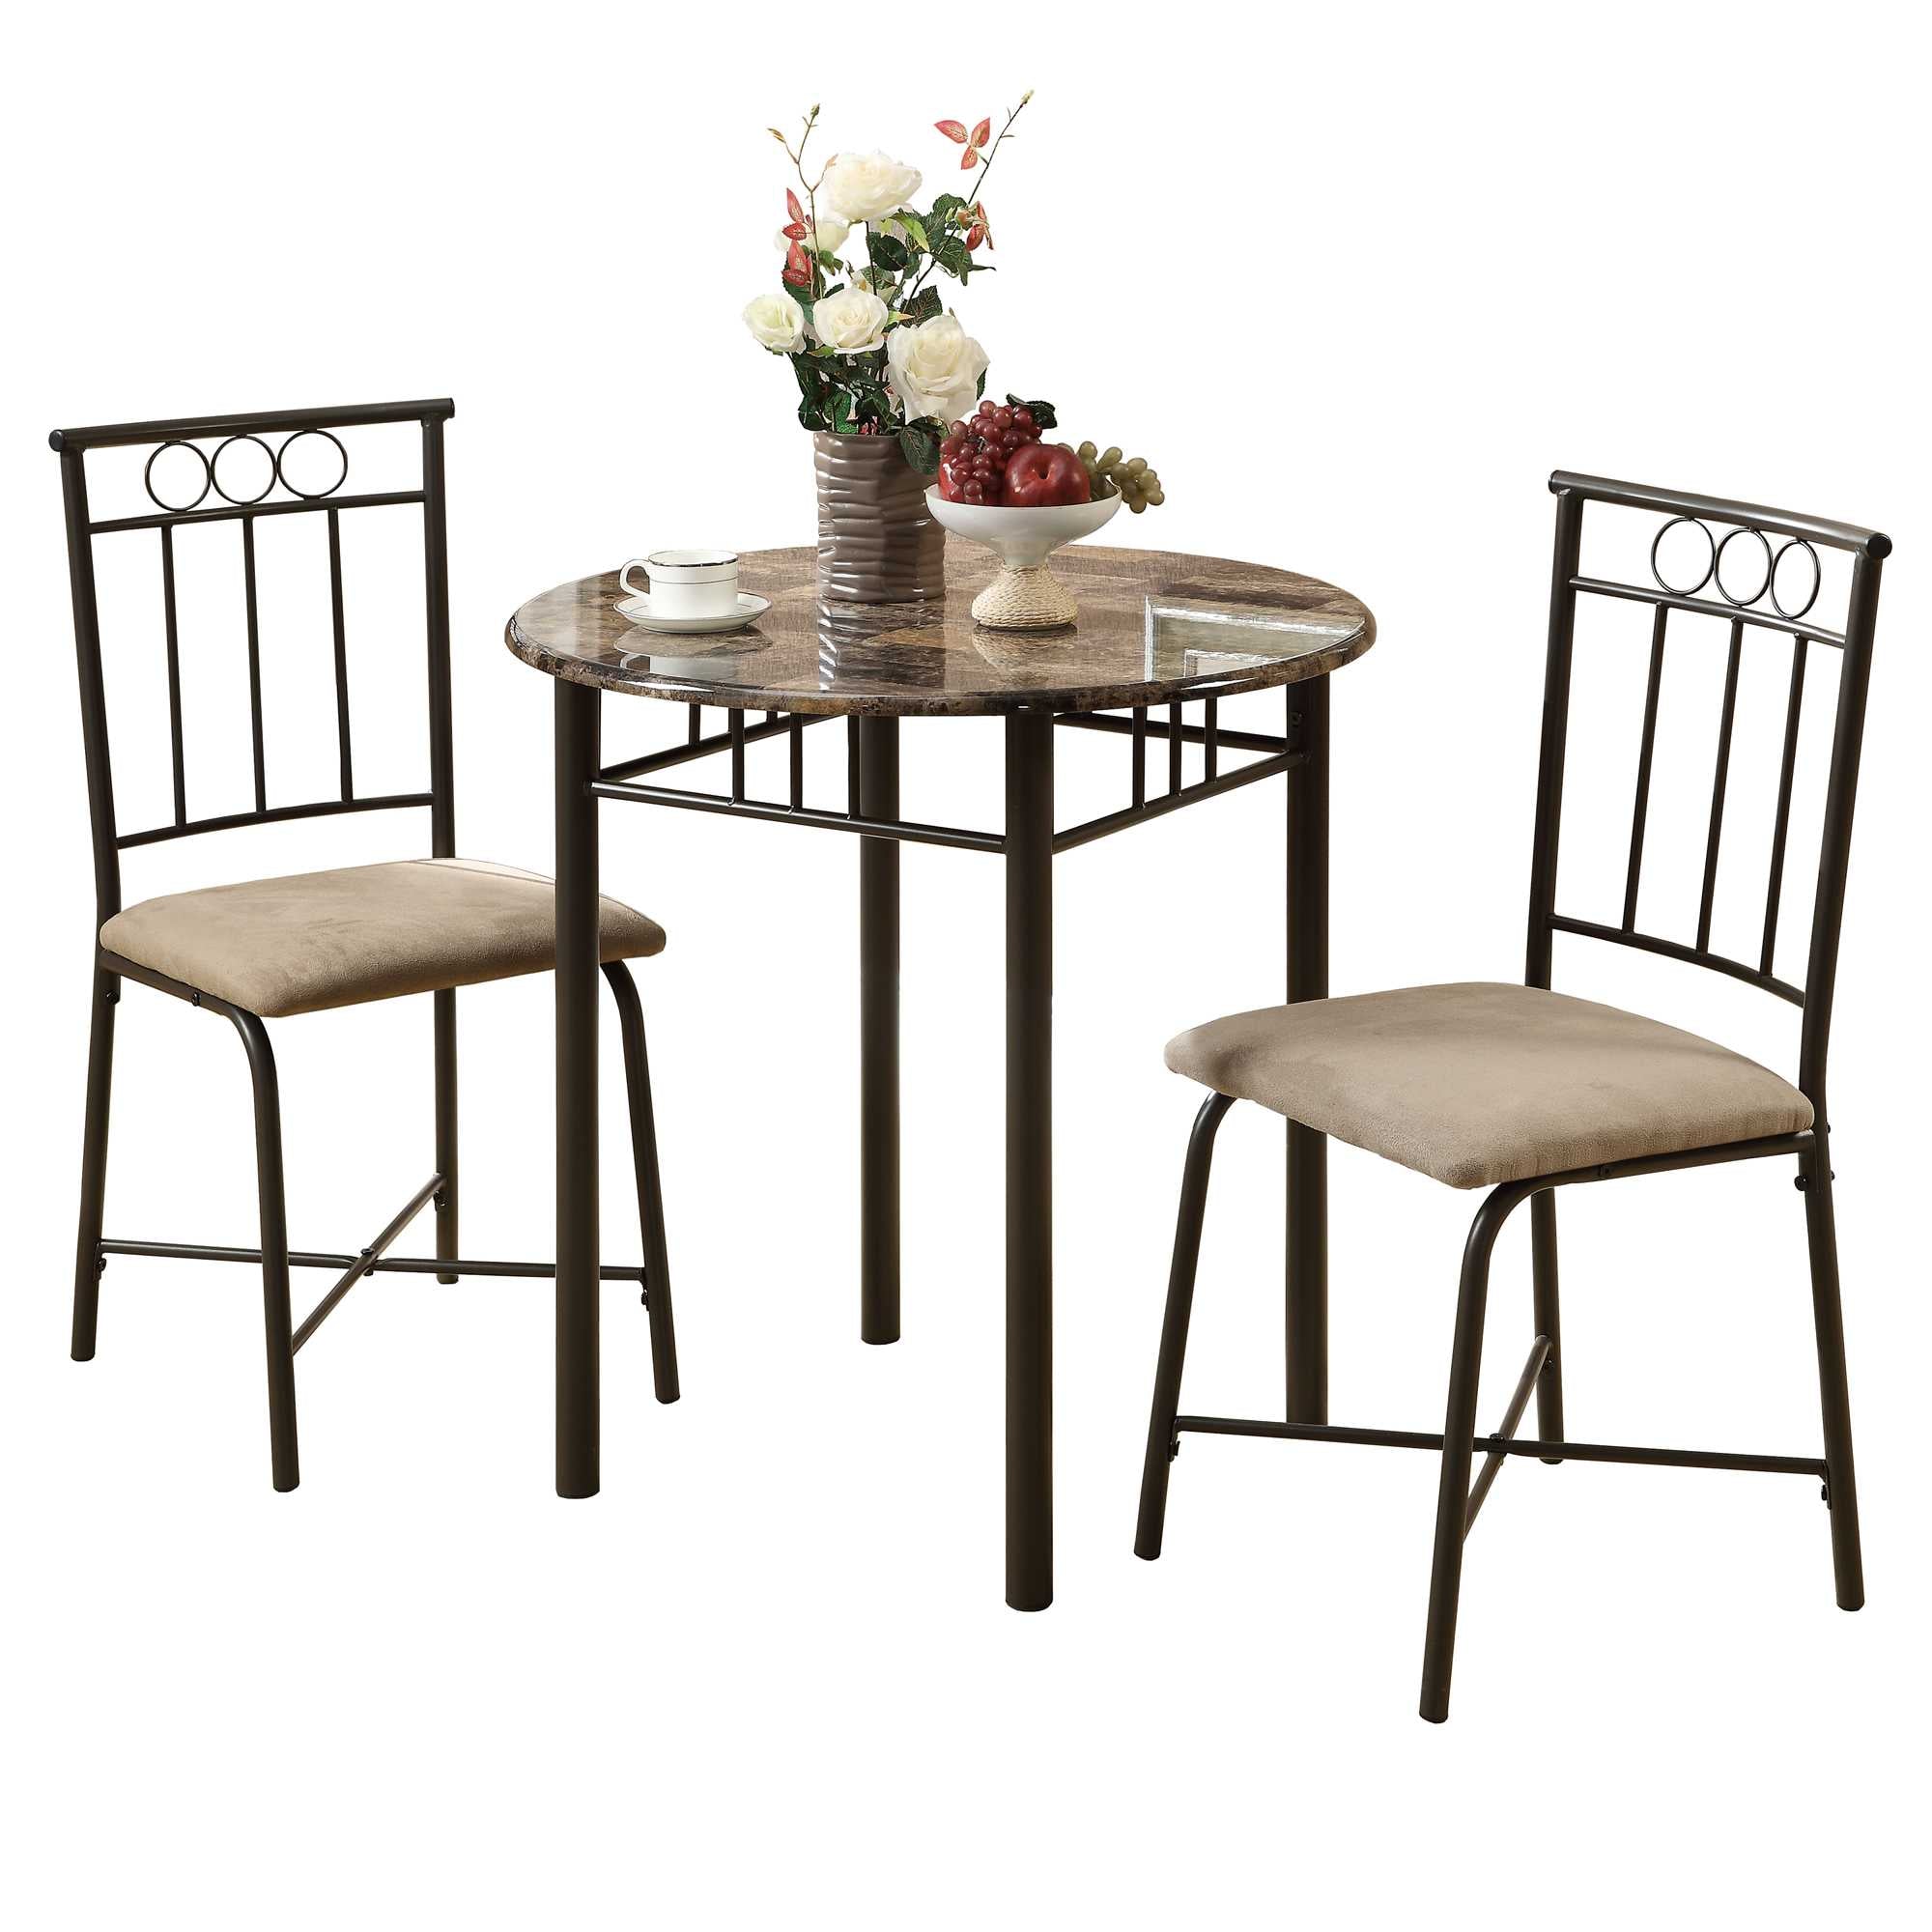 64" X 64" X 101" Cappuccino Beige Brown Metal Foam Microfiber 3Pcs Dining Set - Tuesday Morning-Dining Sets